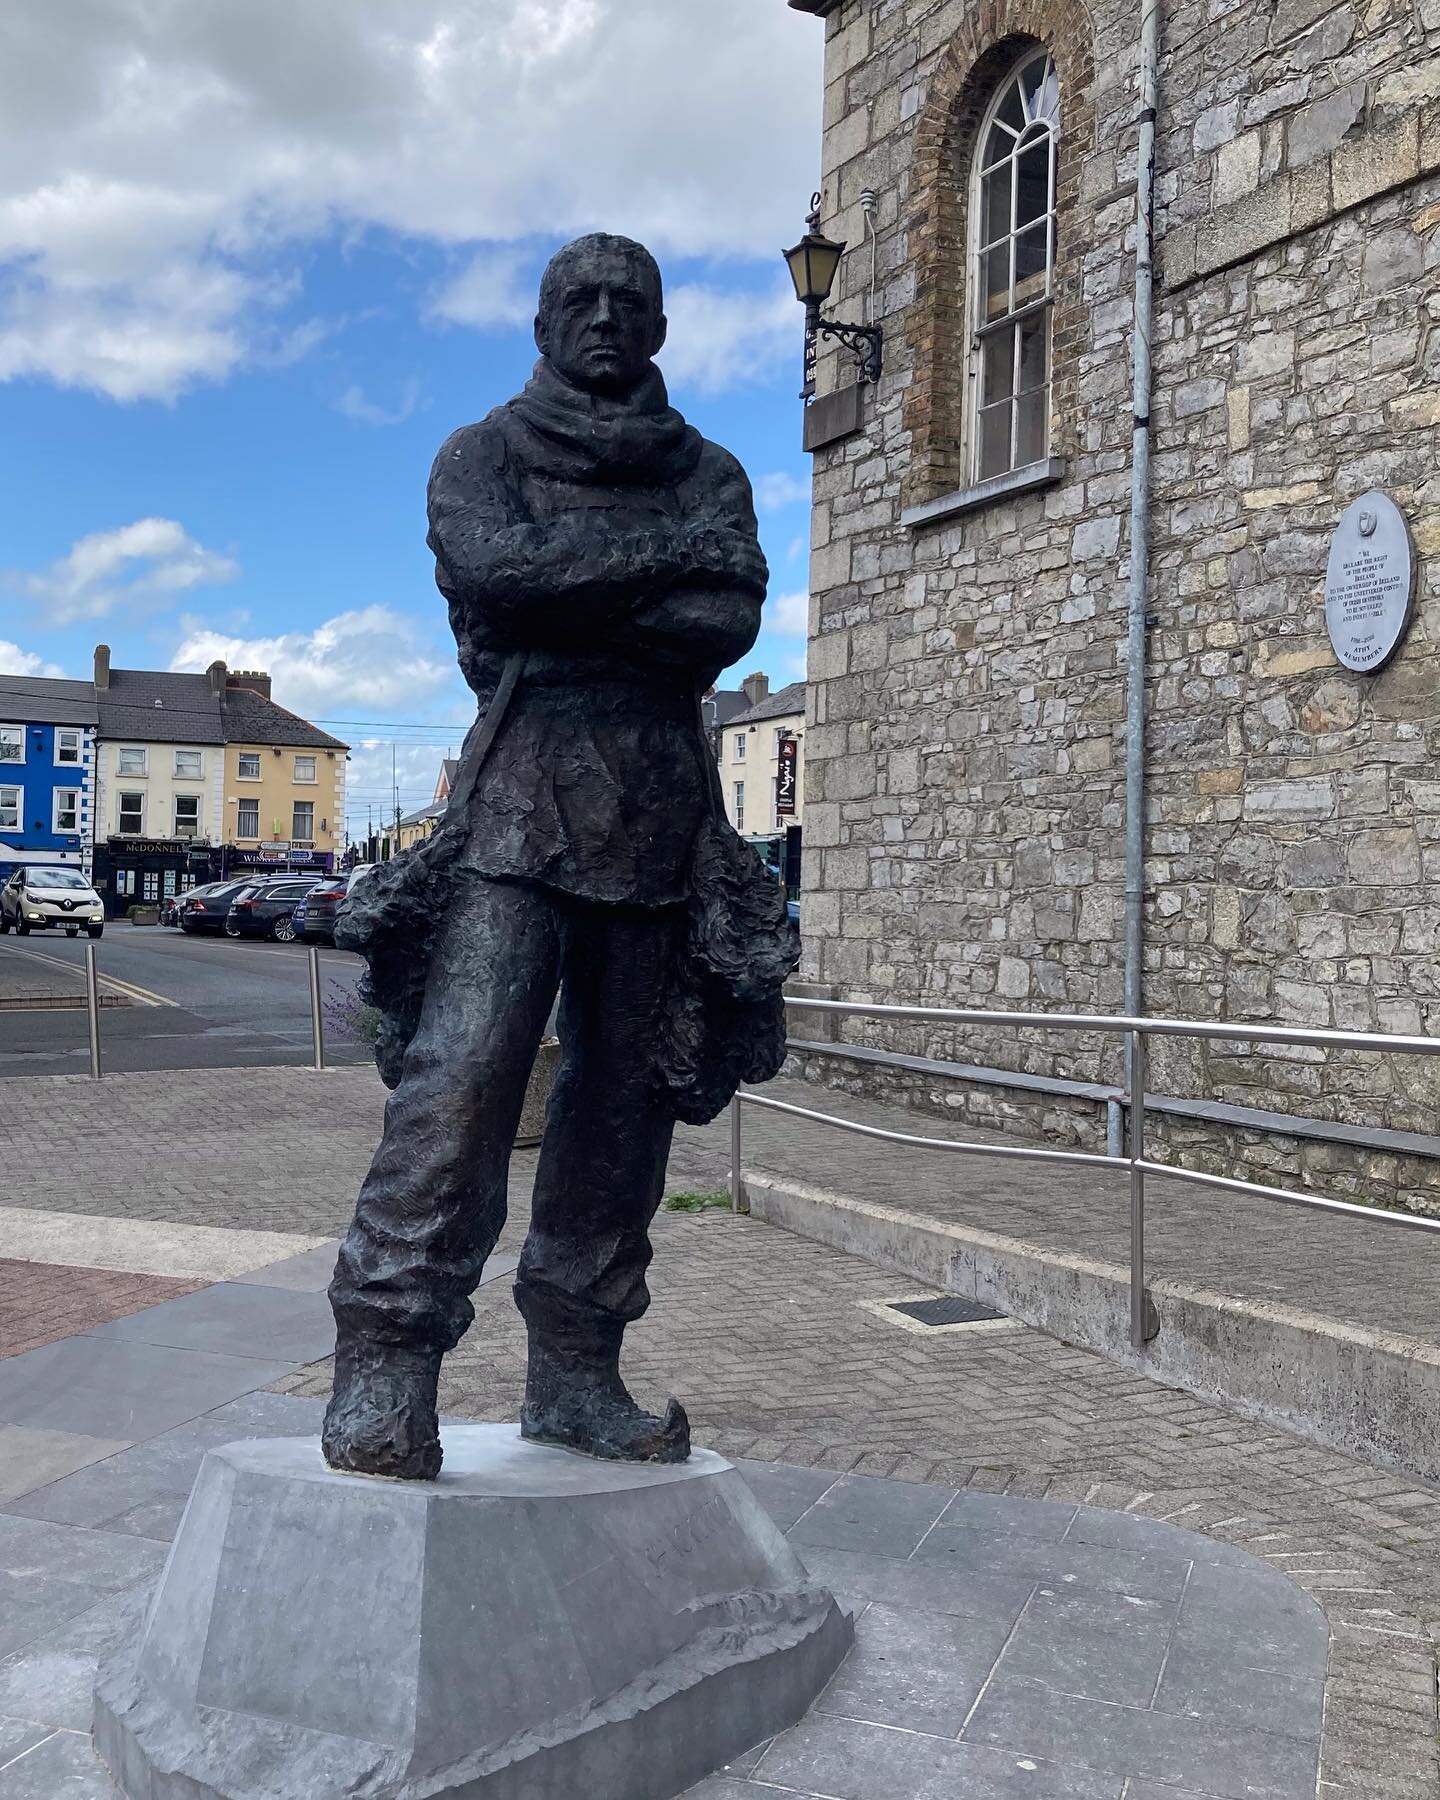 A visit to the Ernest Shackleton museum in Athy , County Kildare is a really interesting place to spend an hour or two. #kildaretourism